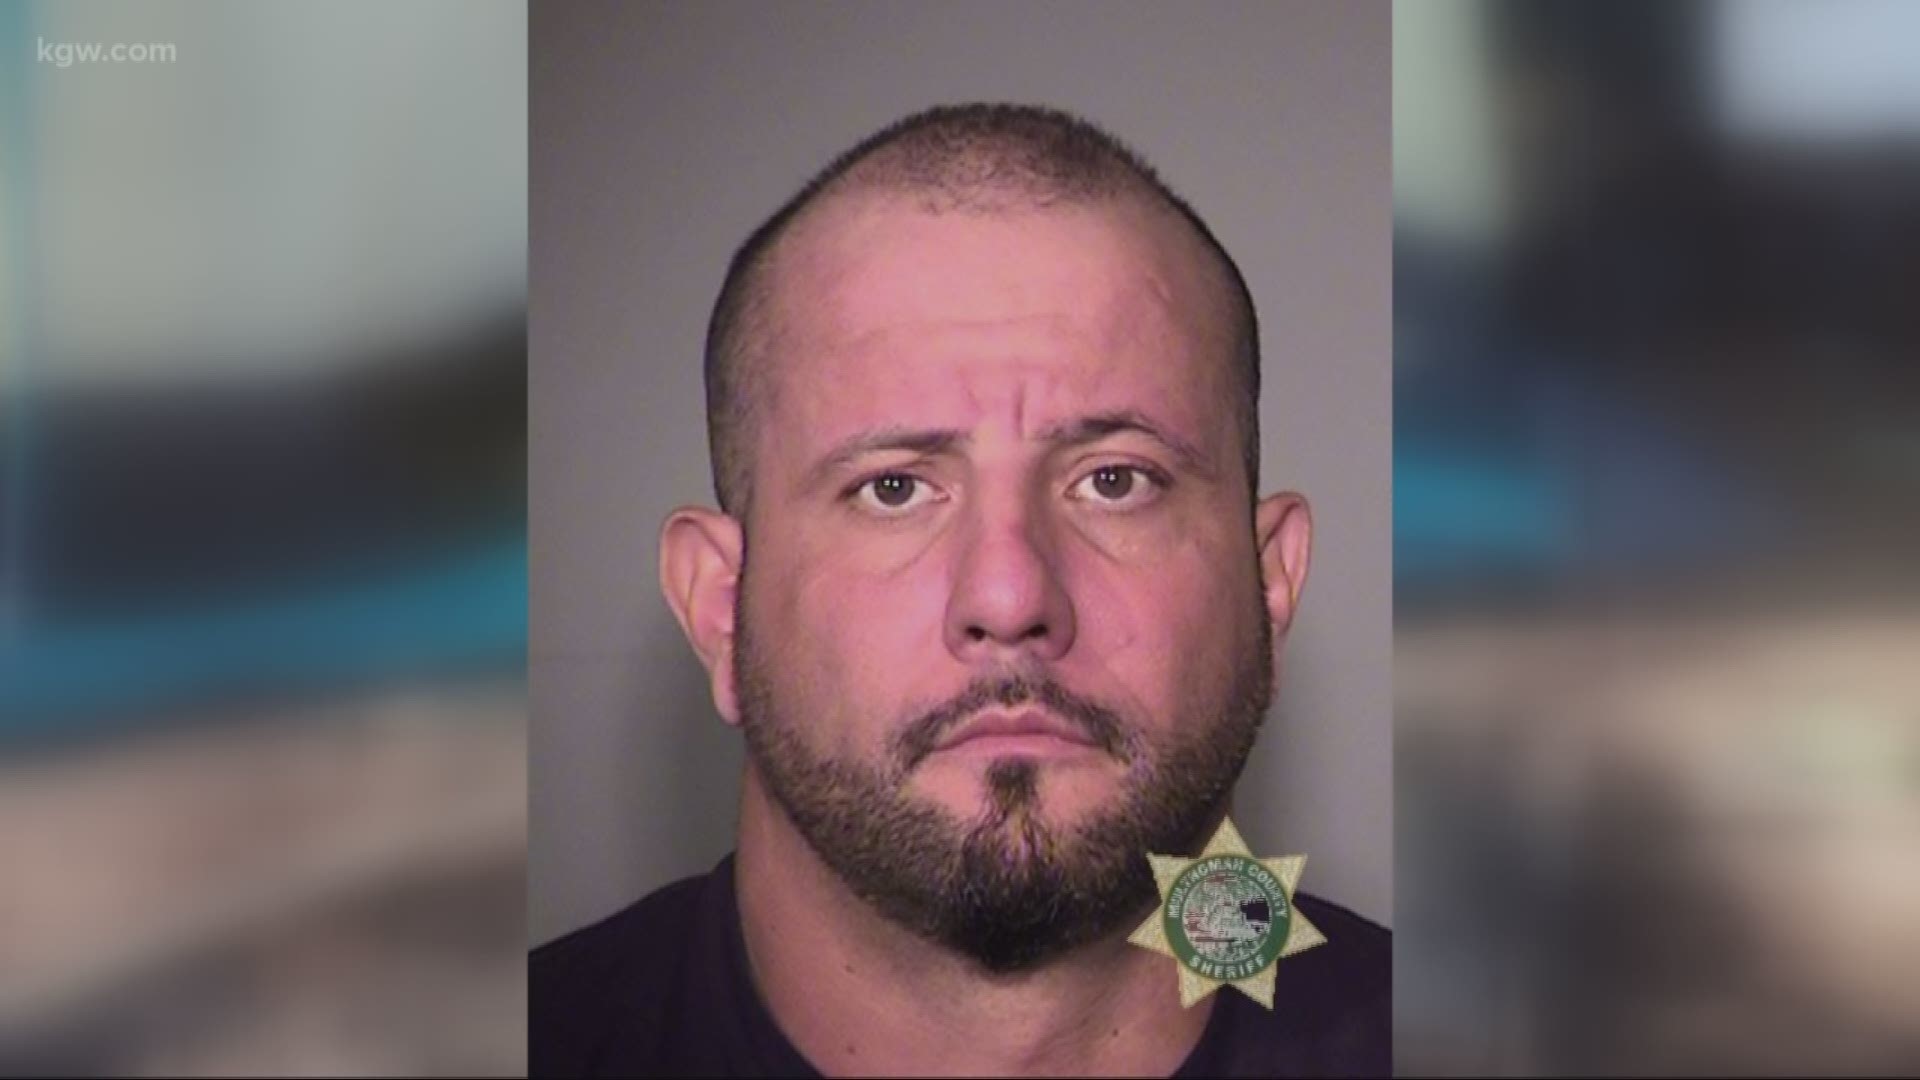 Portland fire investigators on Monday arrested a man who they said intentionally set a homeless person’s tent and belongings on fire earlier this month.